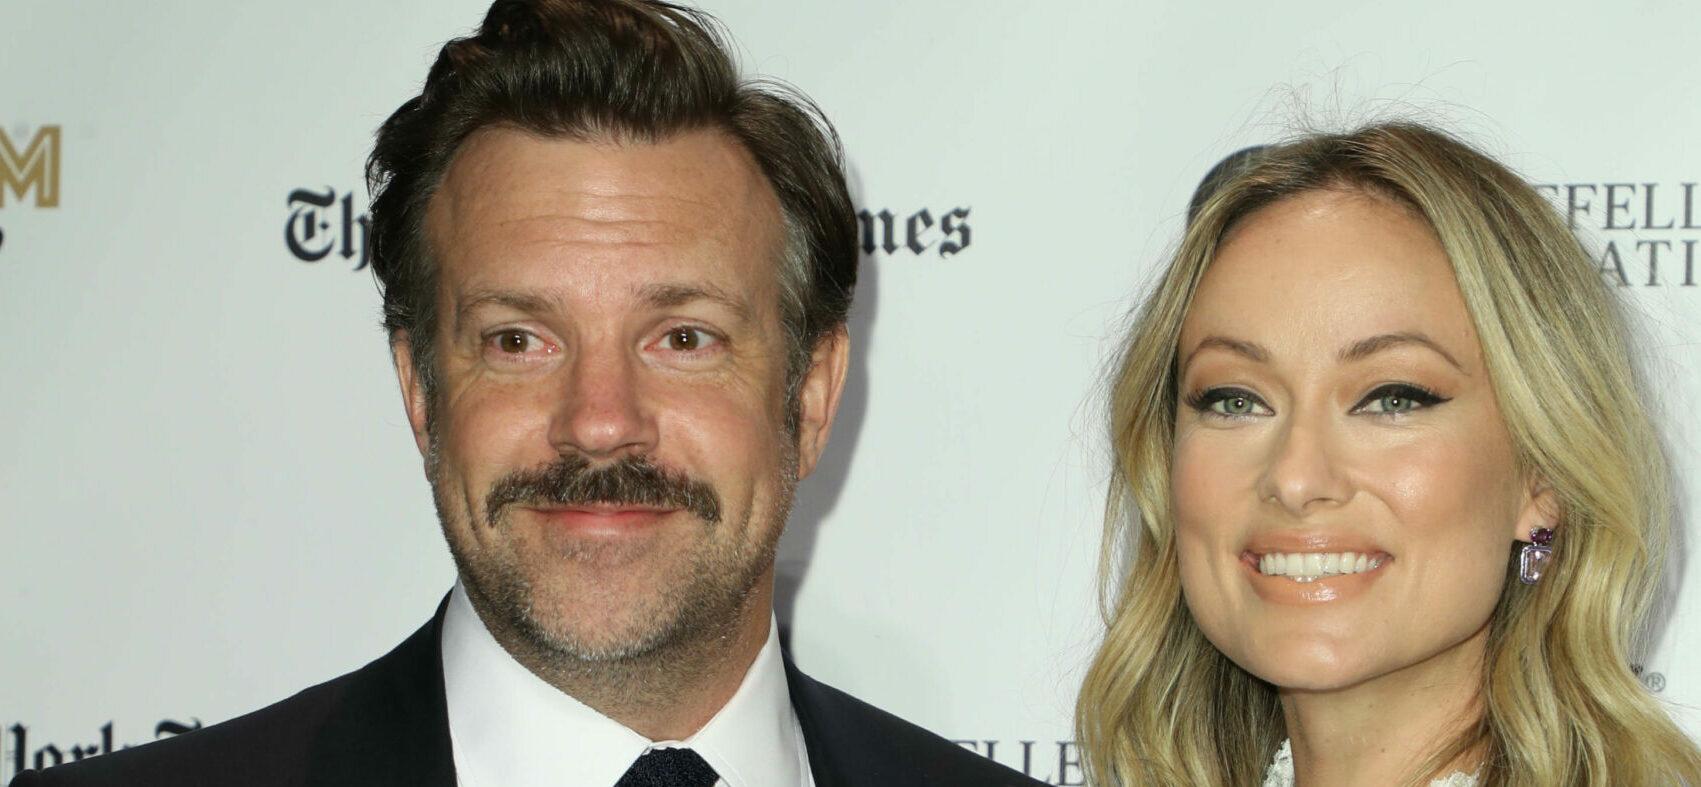 Olivia Wilde & Jason Sudeikis Were ‘Over Long Before’ She Got With Harry Styles